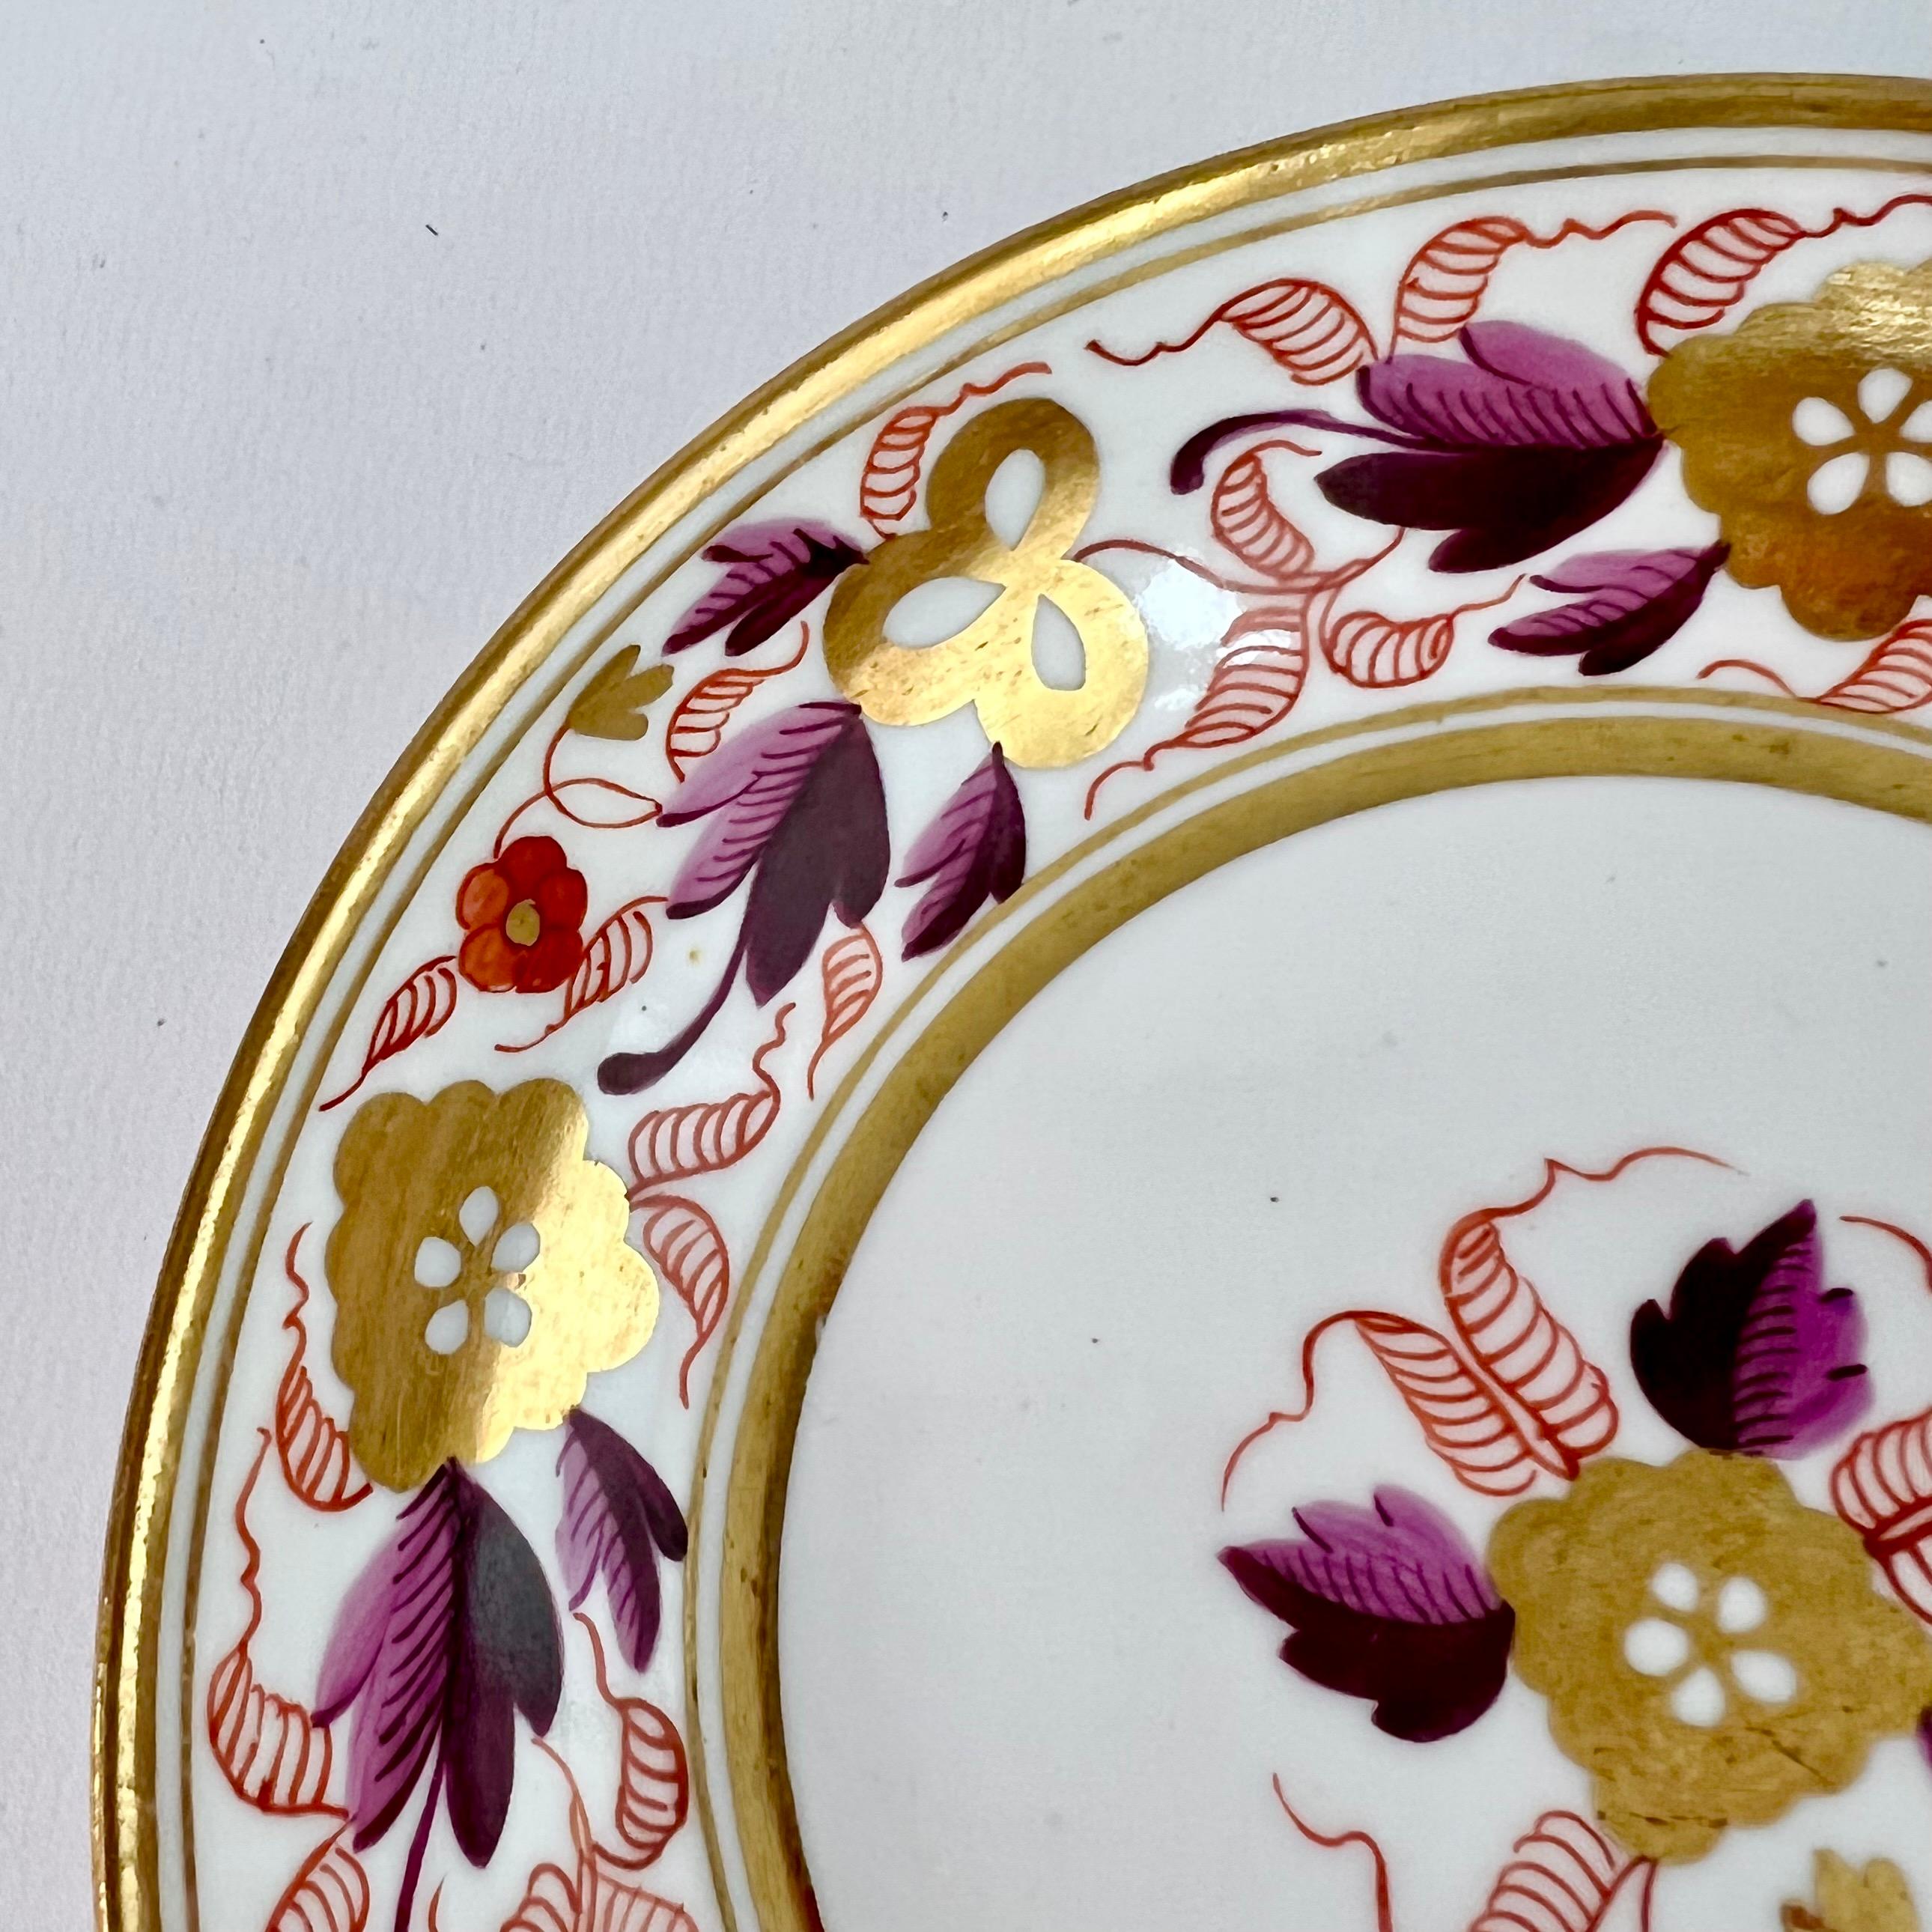 Spode Porcelain Teacup Trio, Puce and Gilt Floral Pattern, Neoclassical ca 1810 3